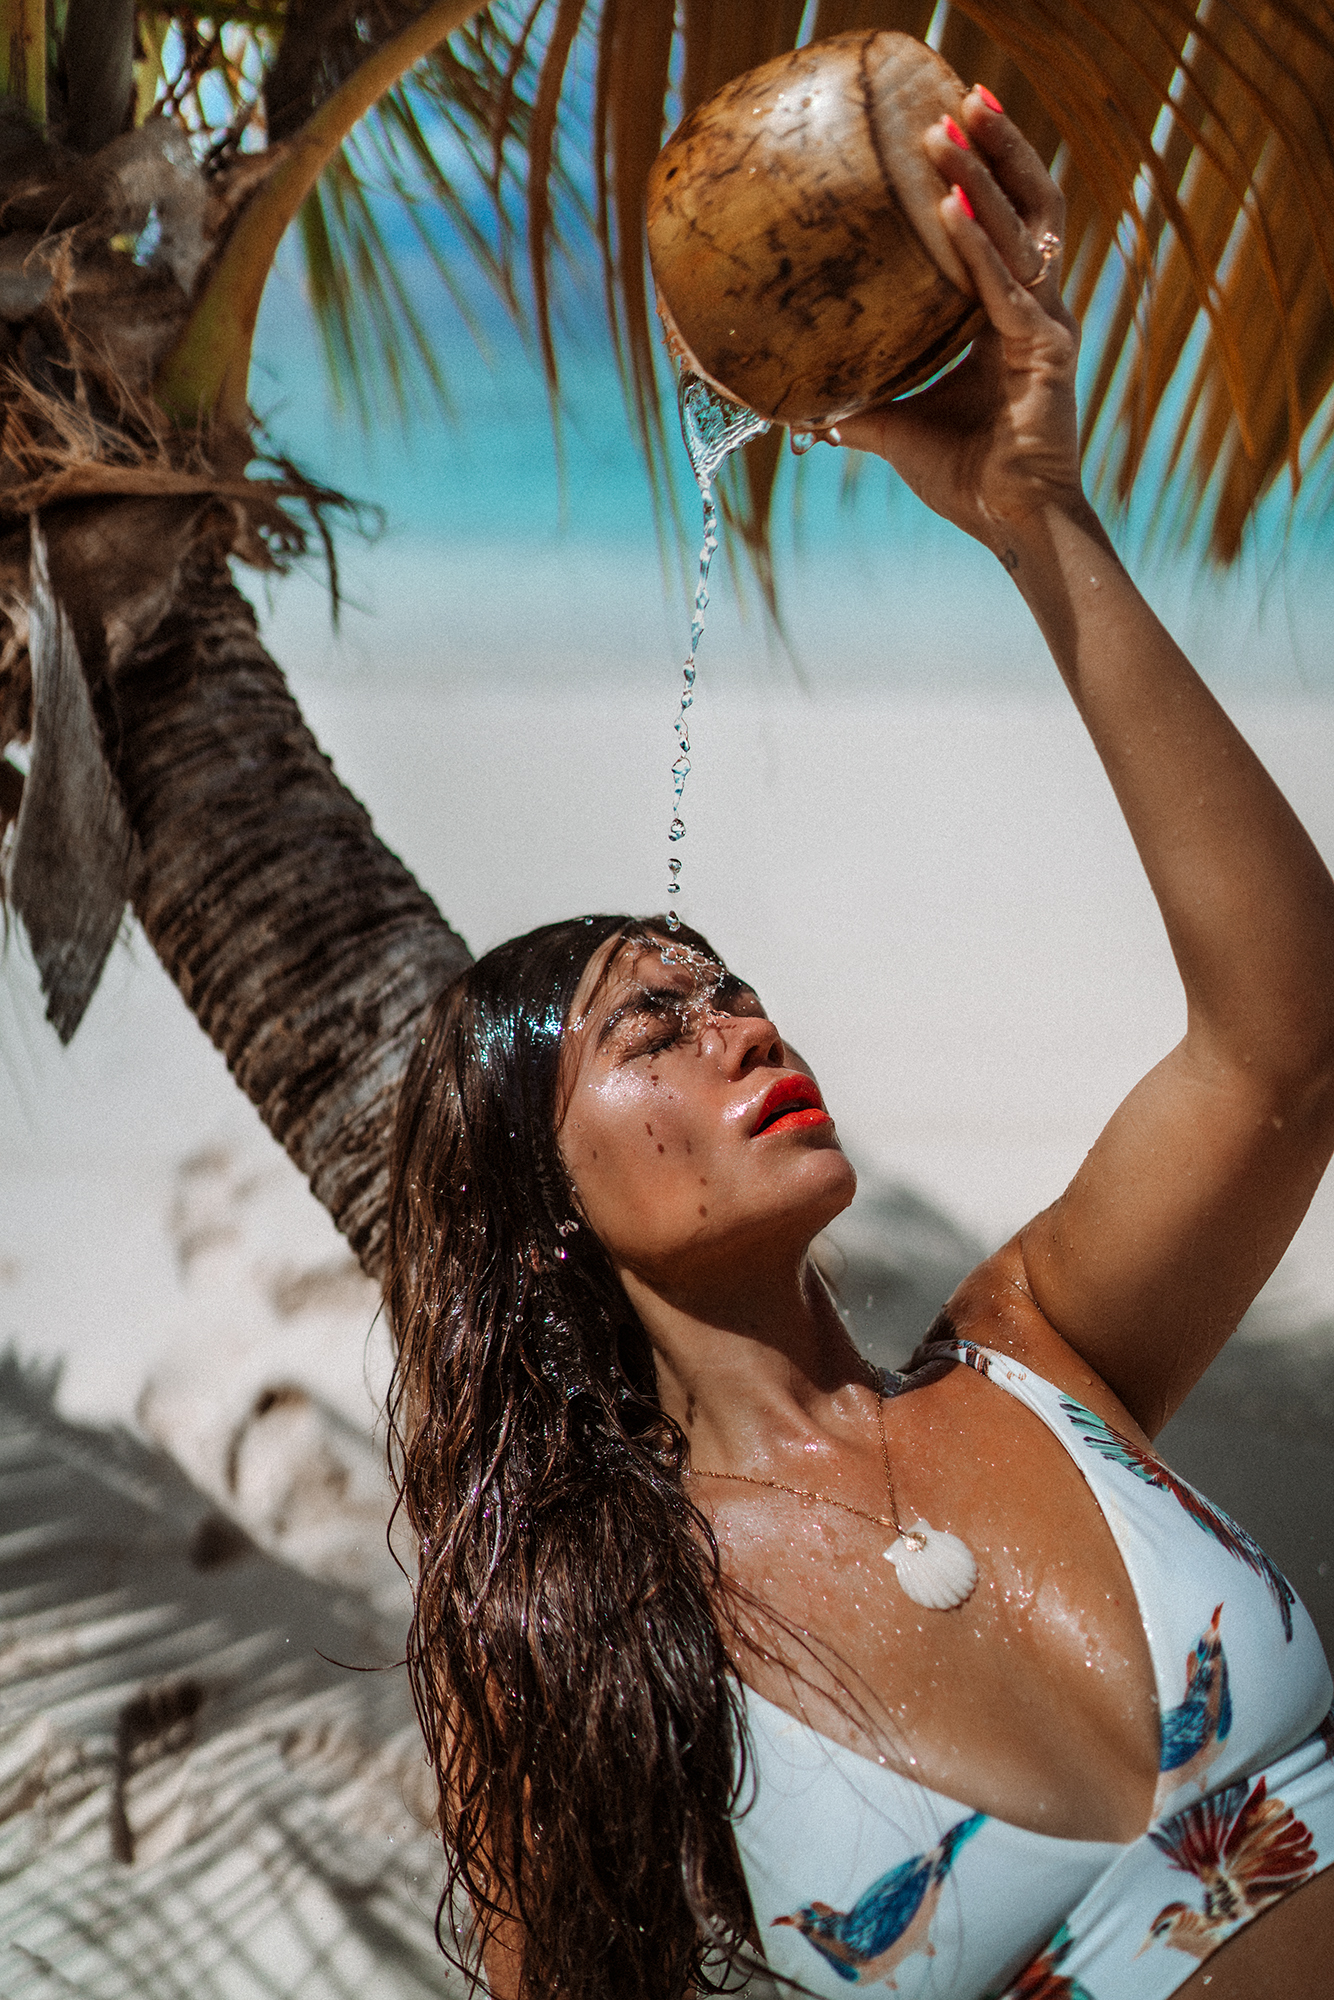 The Best Waterproof Make-Up Products For Swimming and Tropics